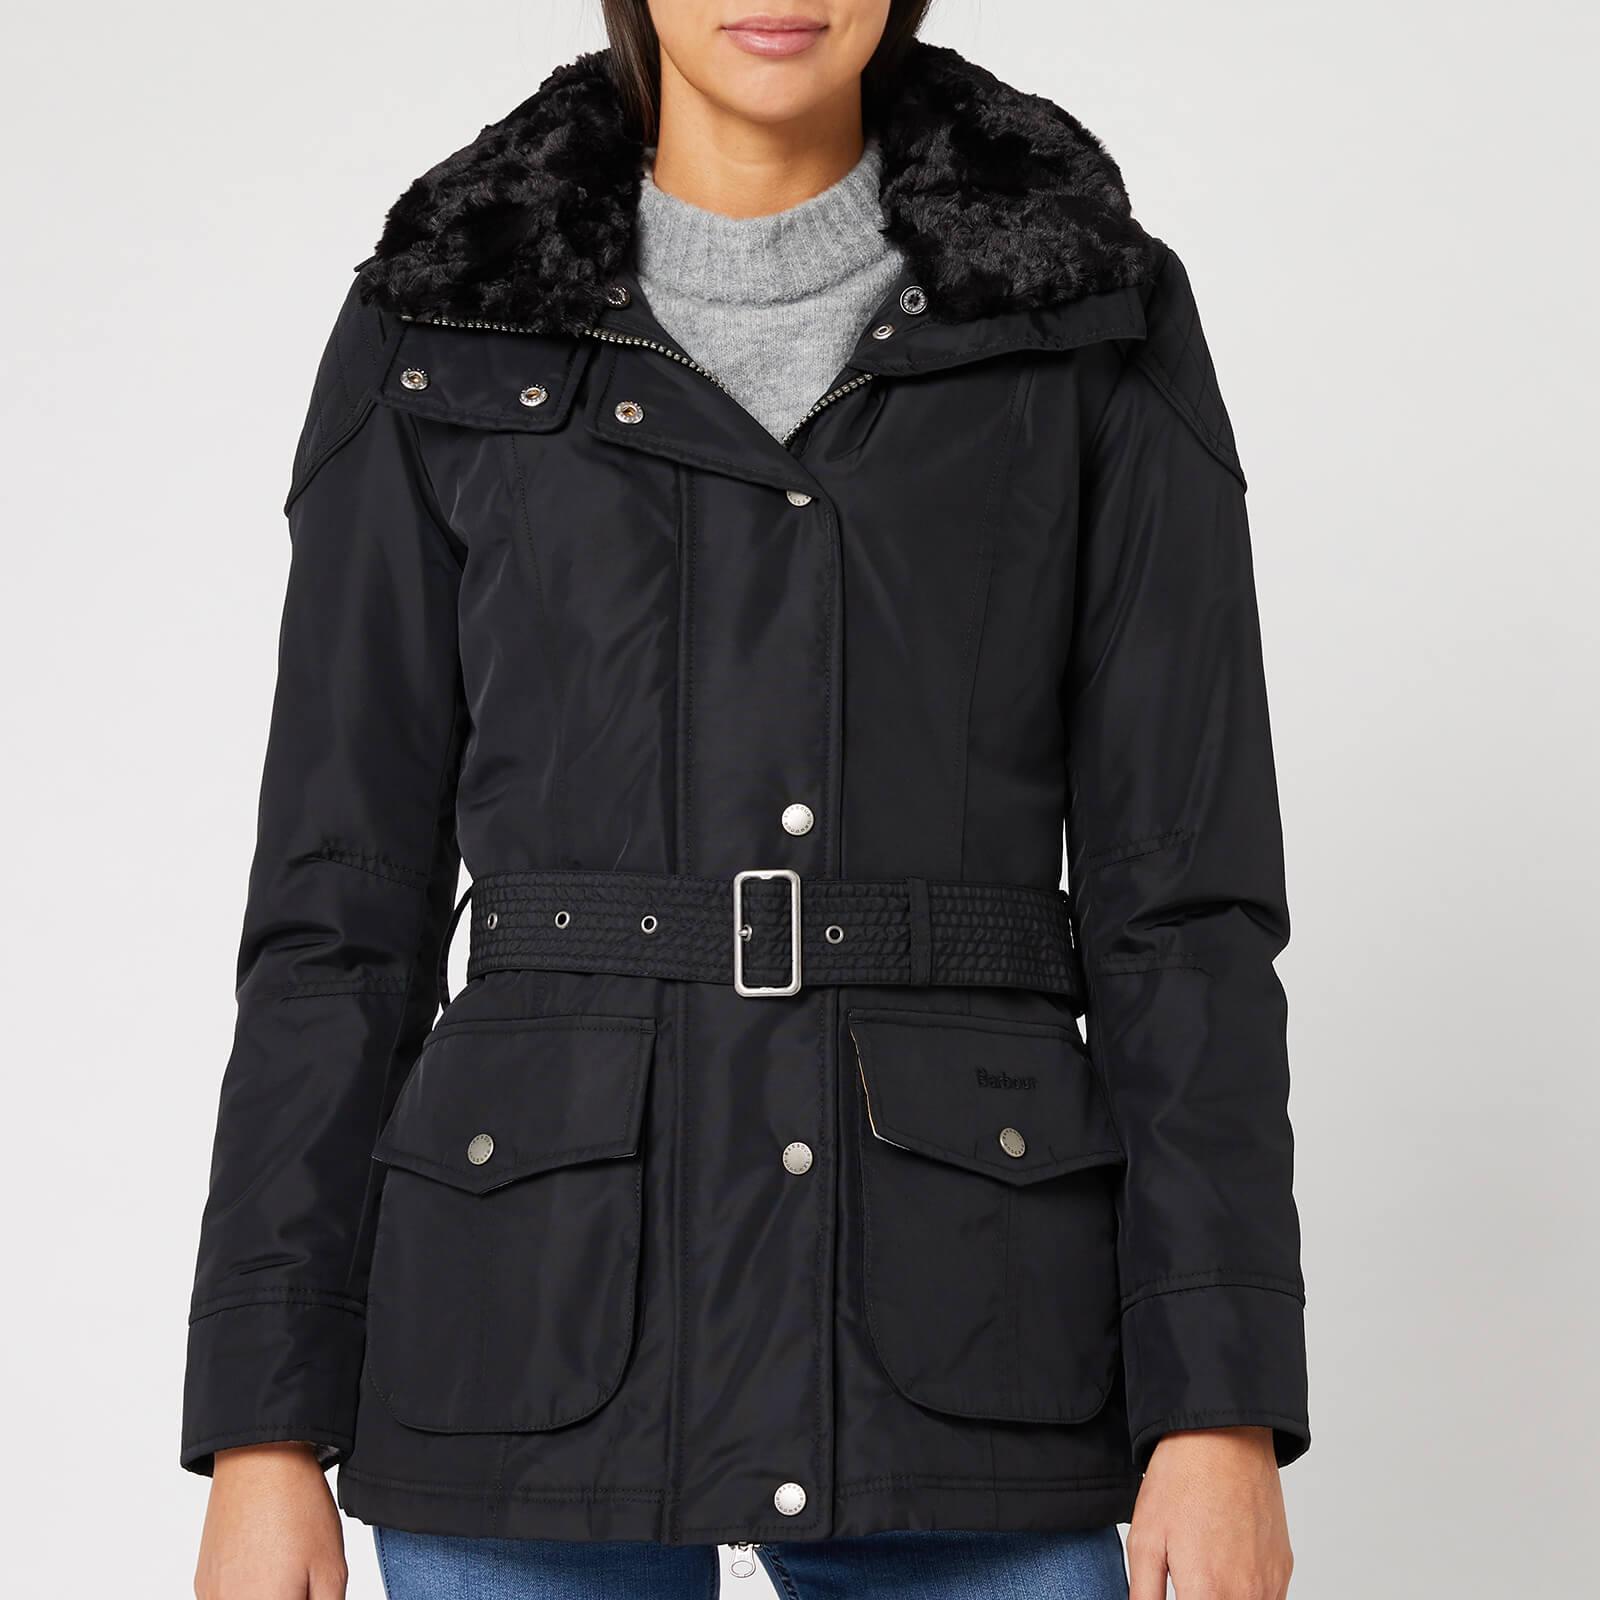 Barbour Outlaw Jacket in Black - Lyst